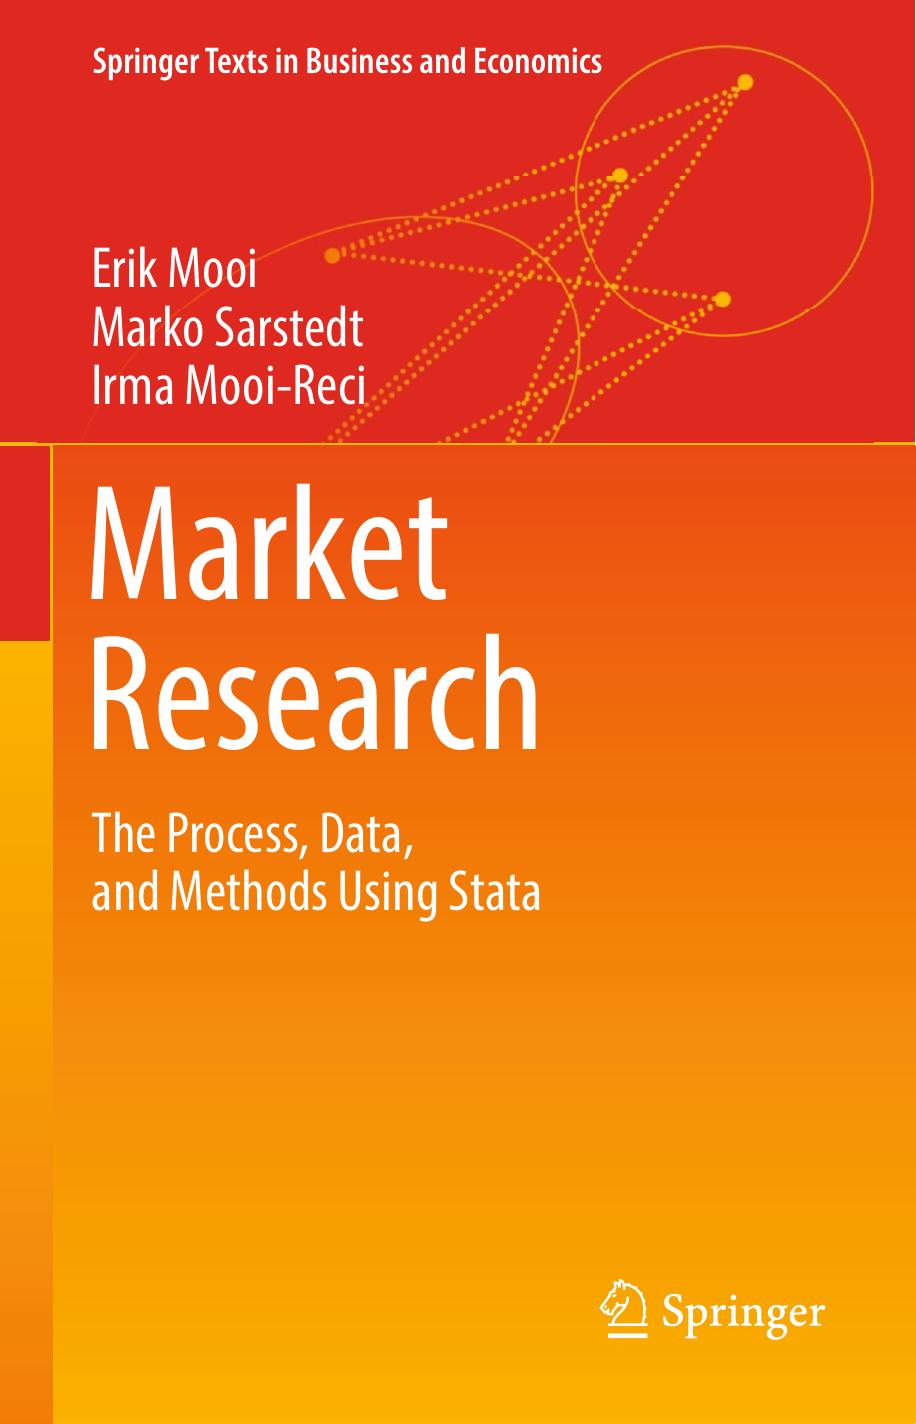 Market Research: The Process, Data, and Methods Using Stata